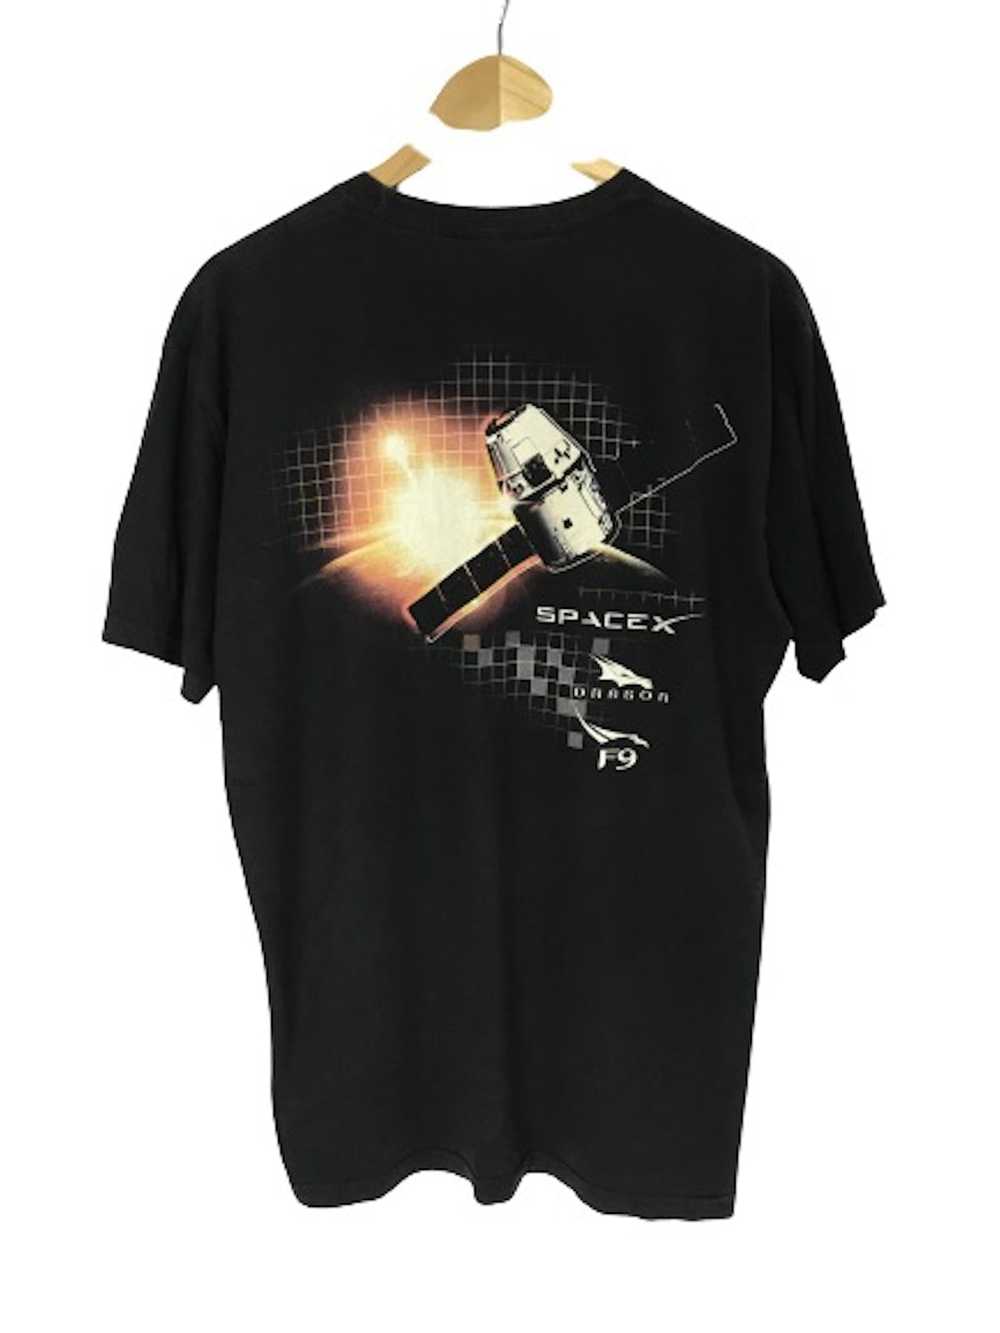 Other Spacex Dragon F9 Tee - image 1